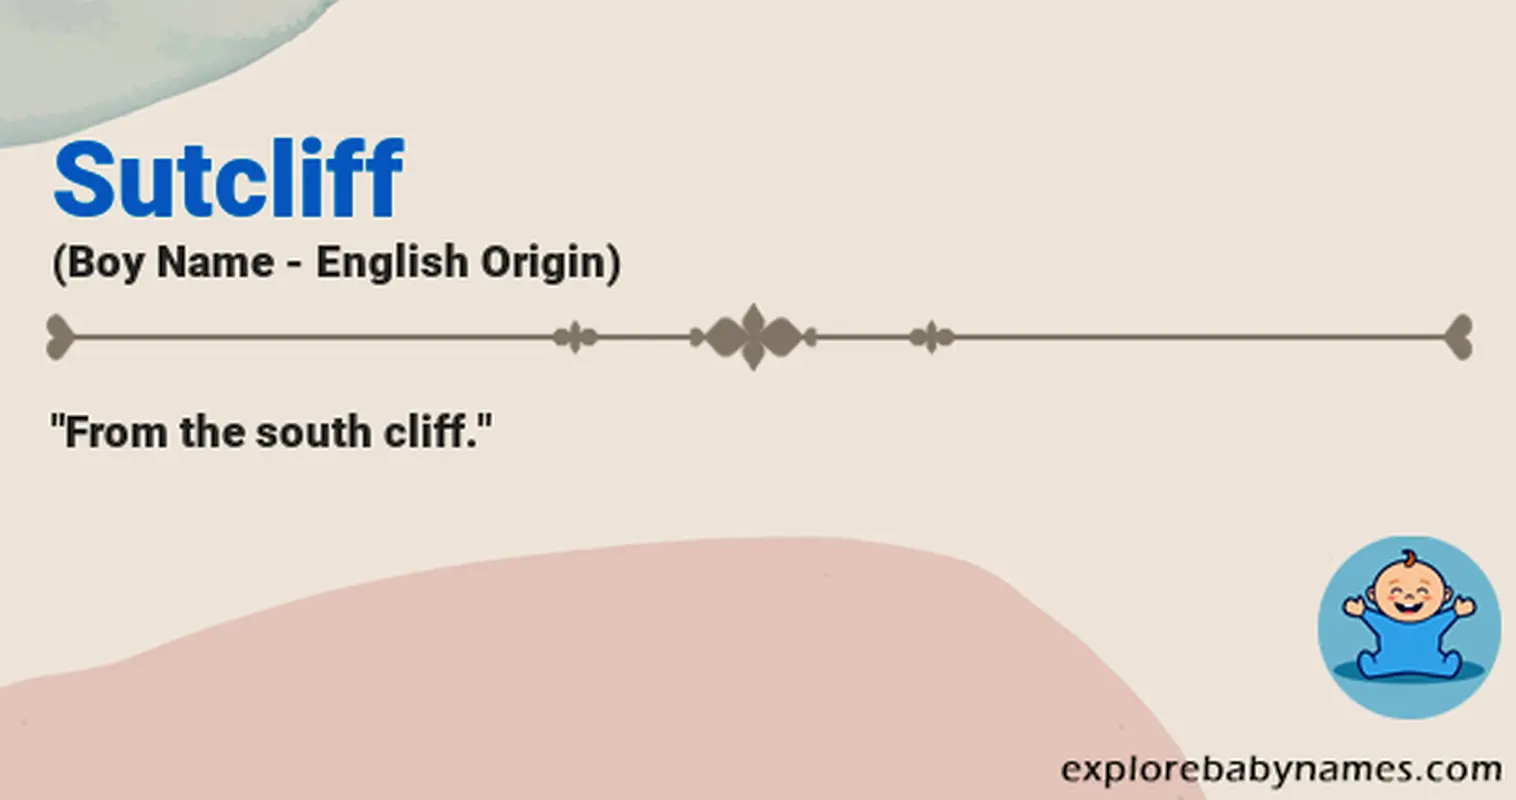 Meaning of Sutcliff